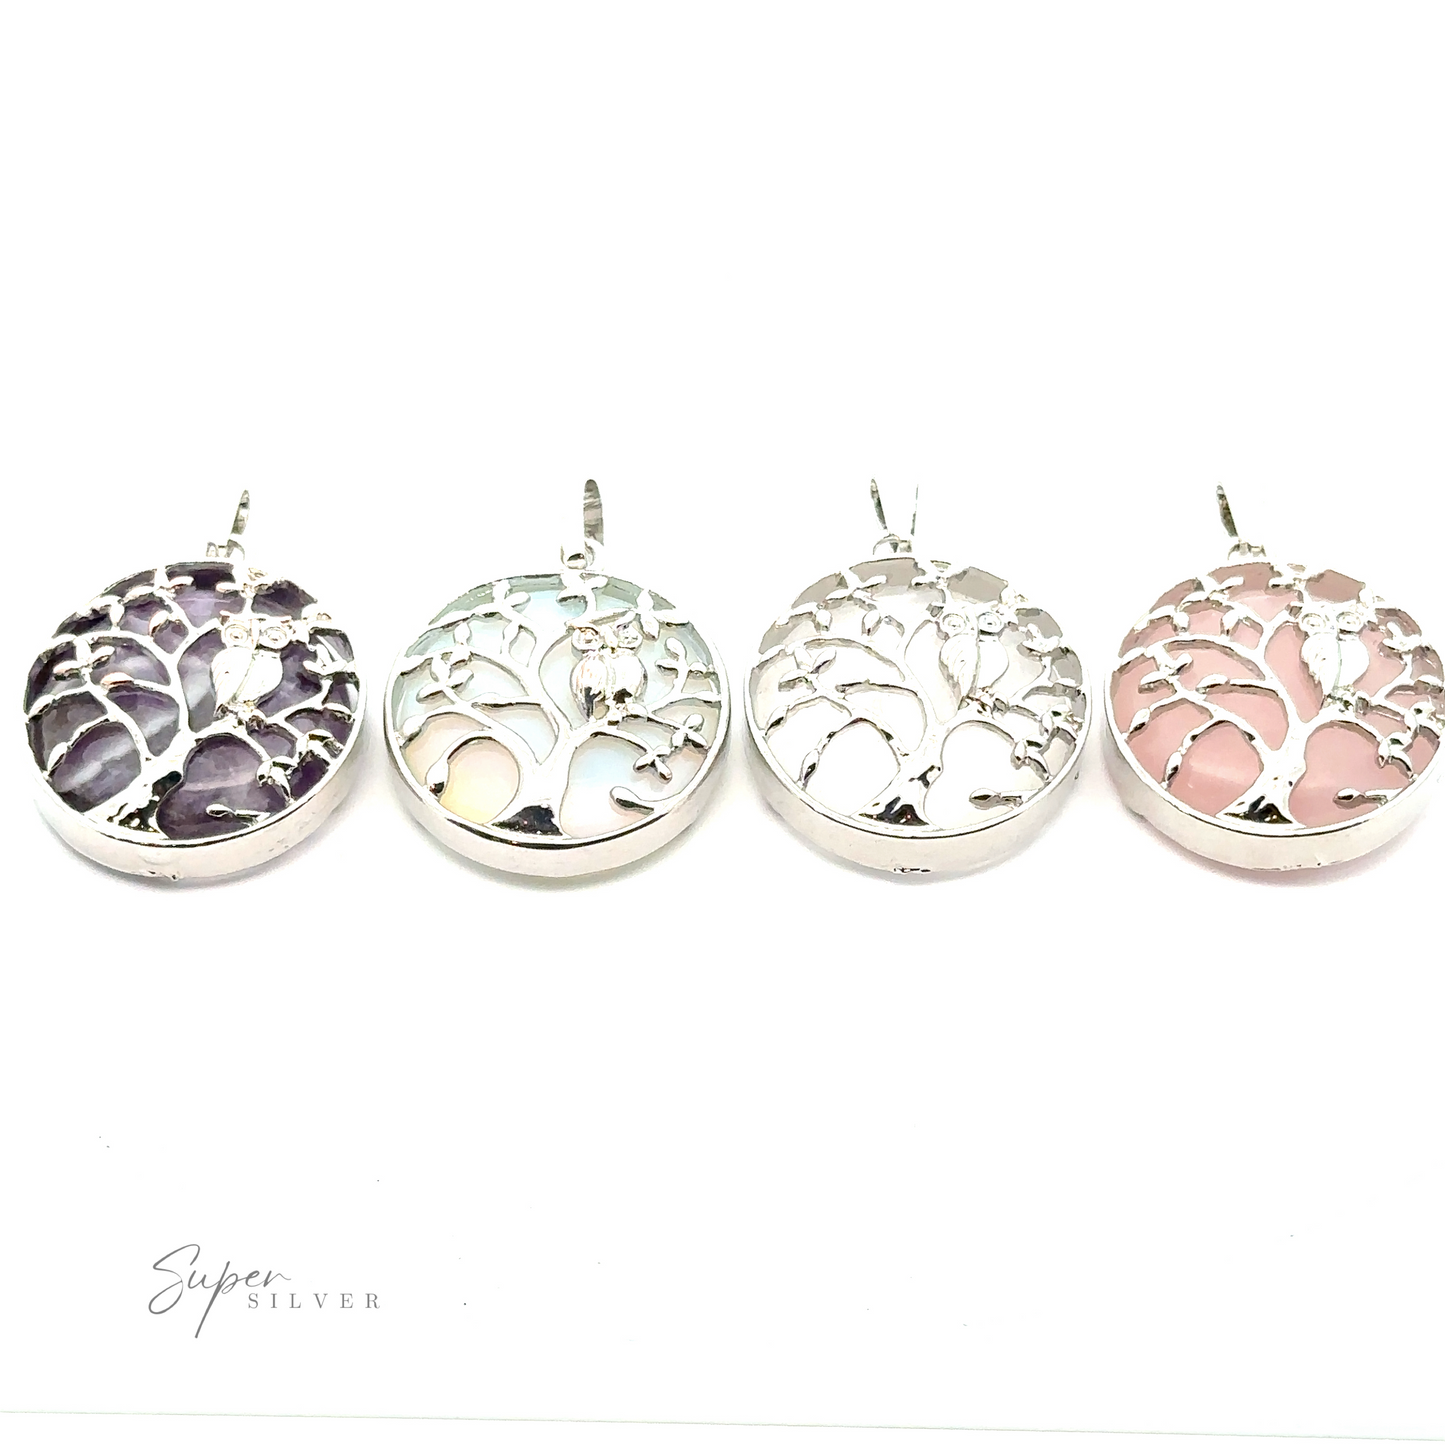 Four Owl and Tree Pendants with different colored backgrounds are displayed in a row on a white surface. The colors from left to right are blue, green, purple Amethyst, and pink. Designed with mixed metals, these pieces add an elegant touch to any outfit.